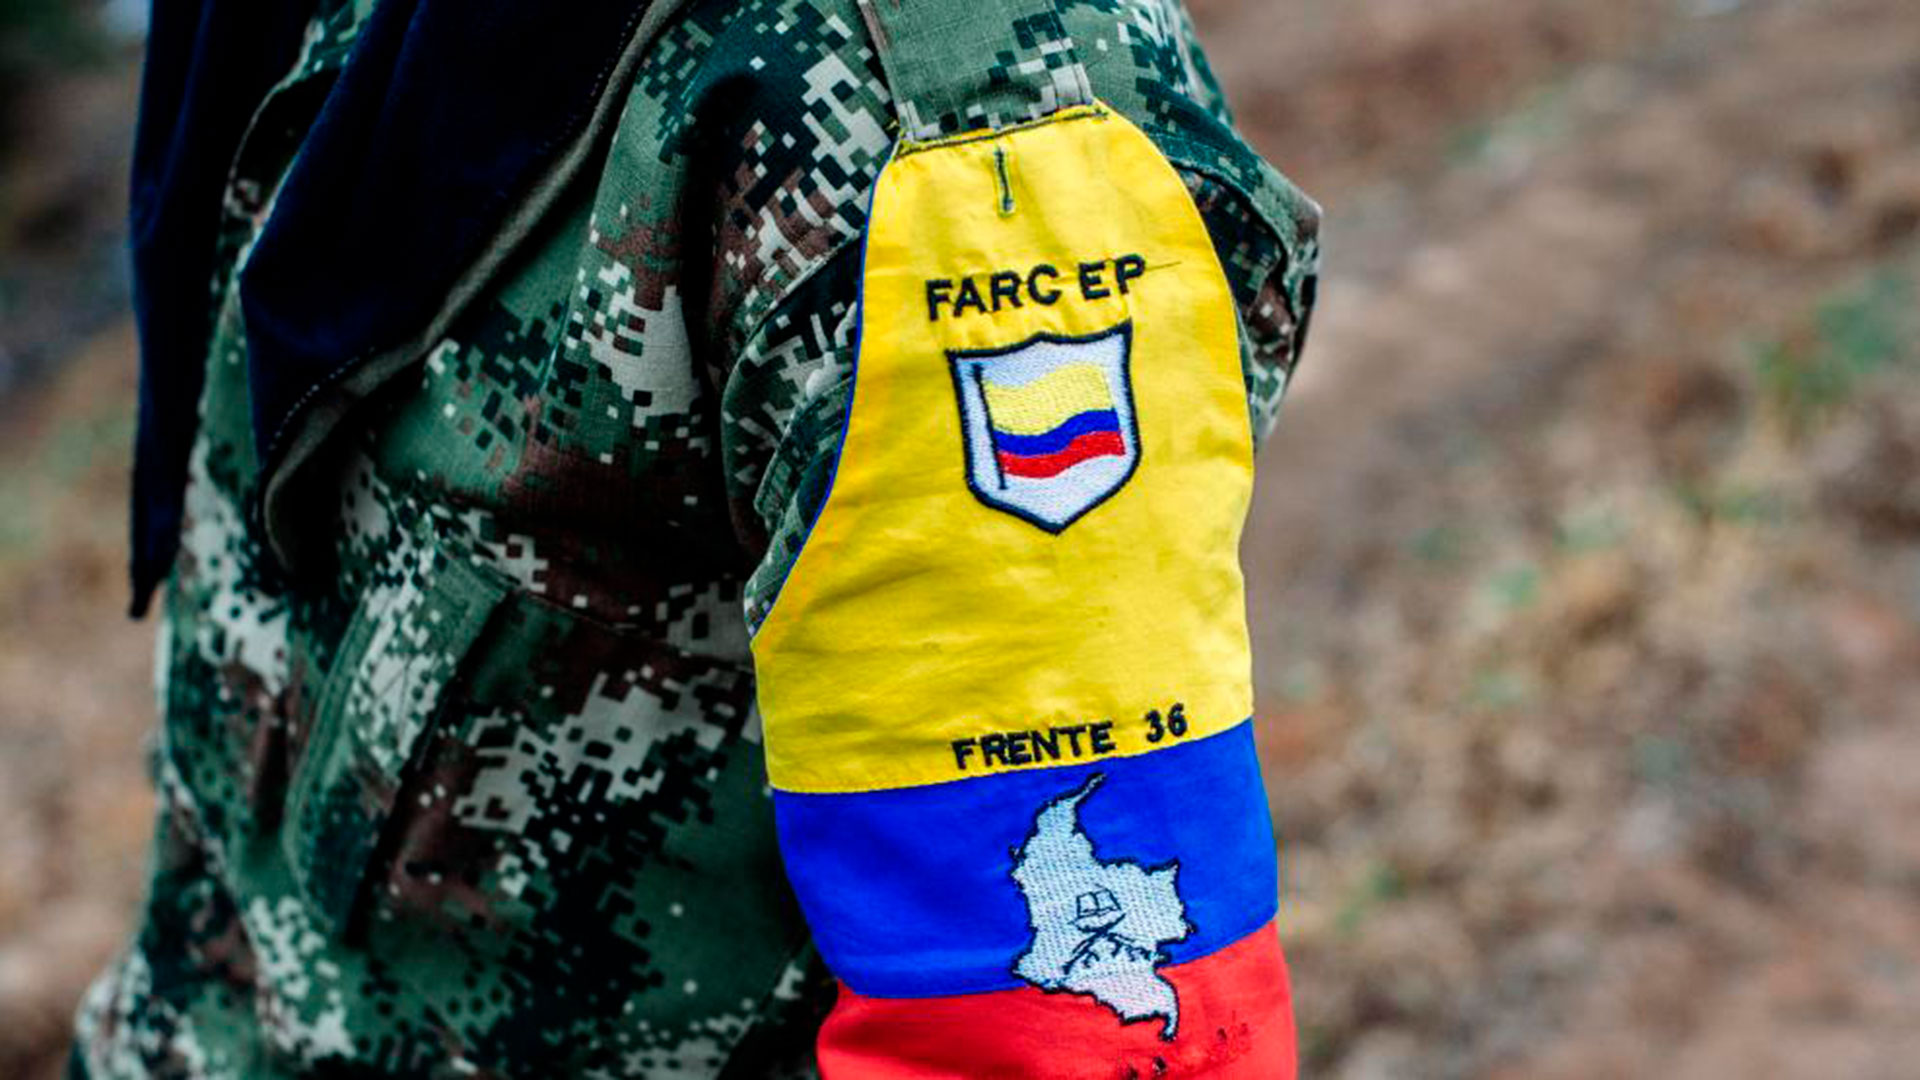 FARC dissidents have received severe blows on the Venezuelan border